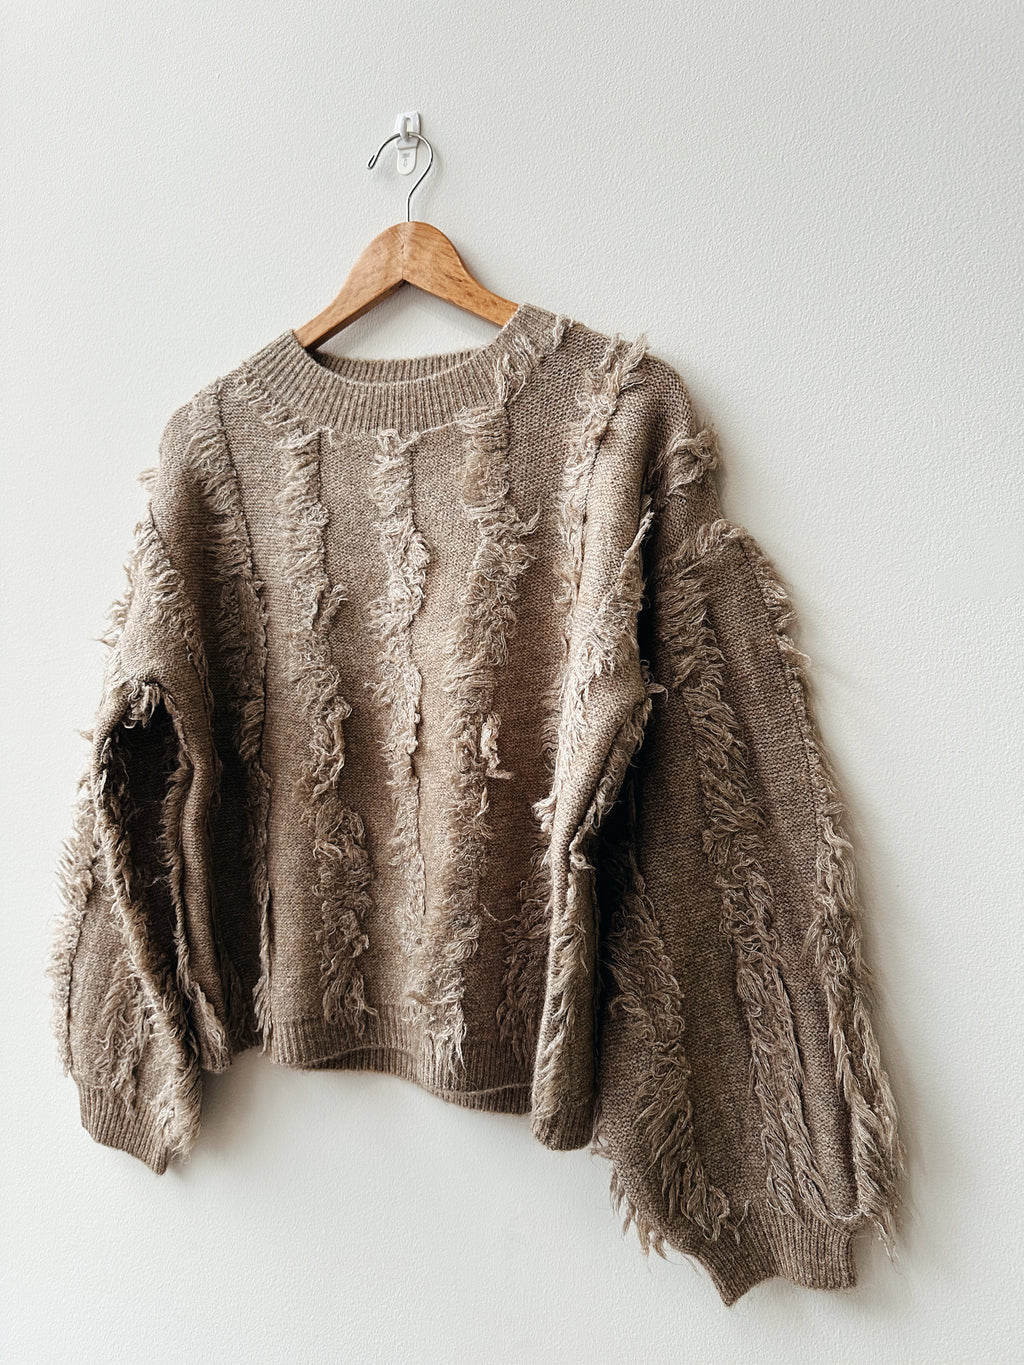 Murre Fringe Sweater in Taupe